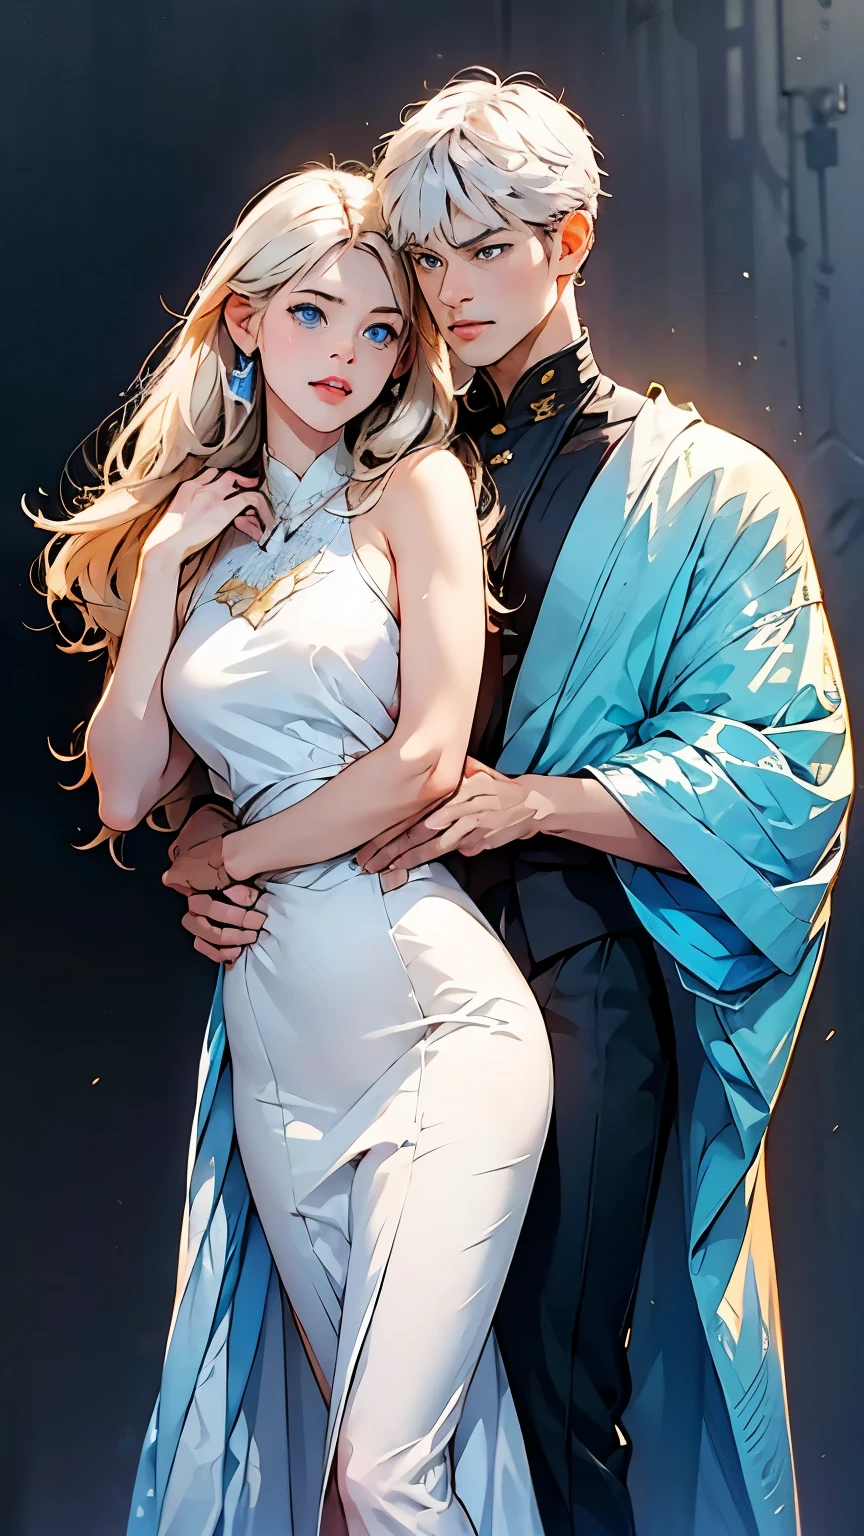 With realistic anime-style illustrations, a pair of young men and women appear. The man has blue eyes and white hair, with a sharp gaze, and is wearing a black suit. The woman has long white hair, And blue eyes, she wears a short white dress, and has a cute face  . The man is holding the woman's waist, and the background is blue in color. 